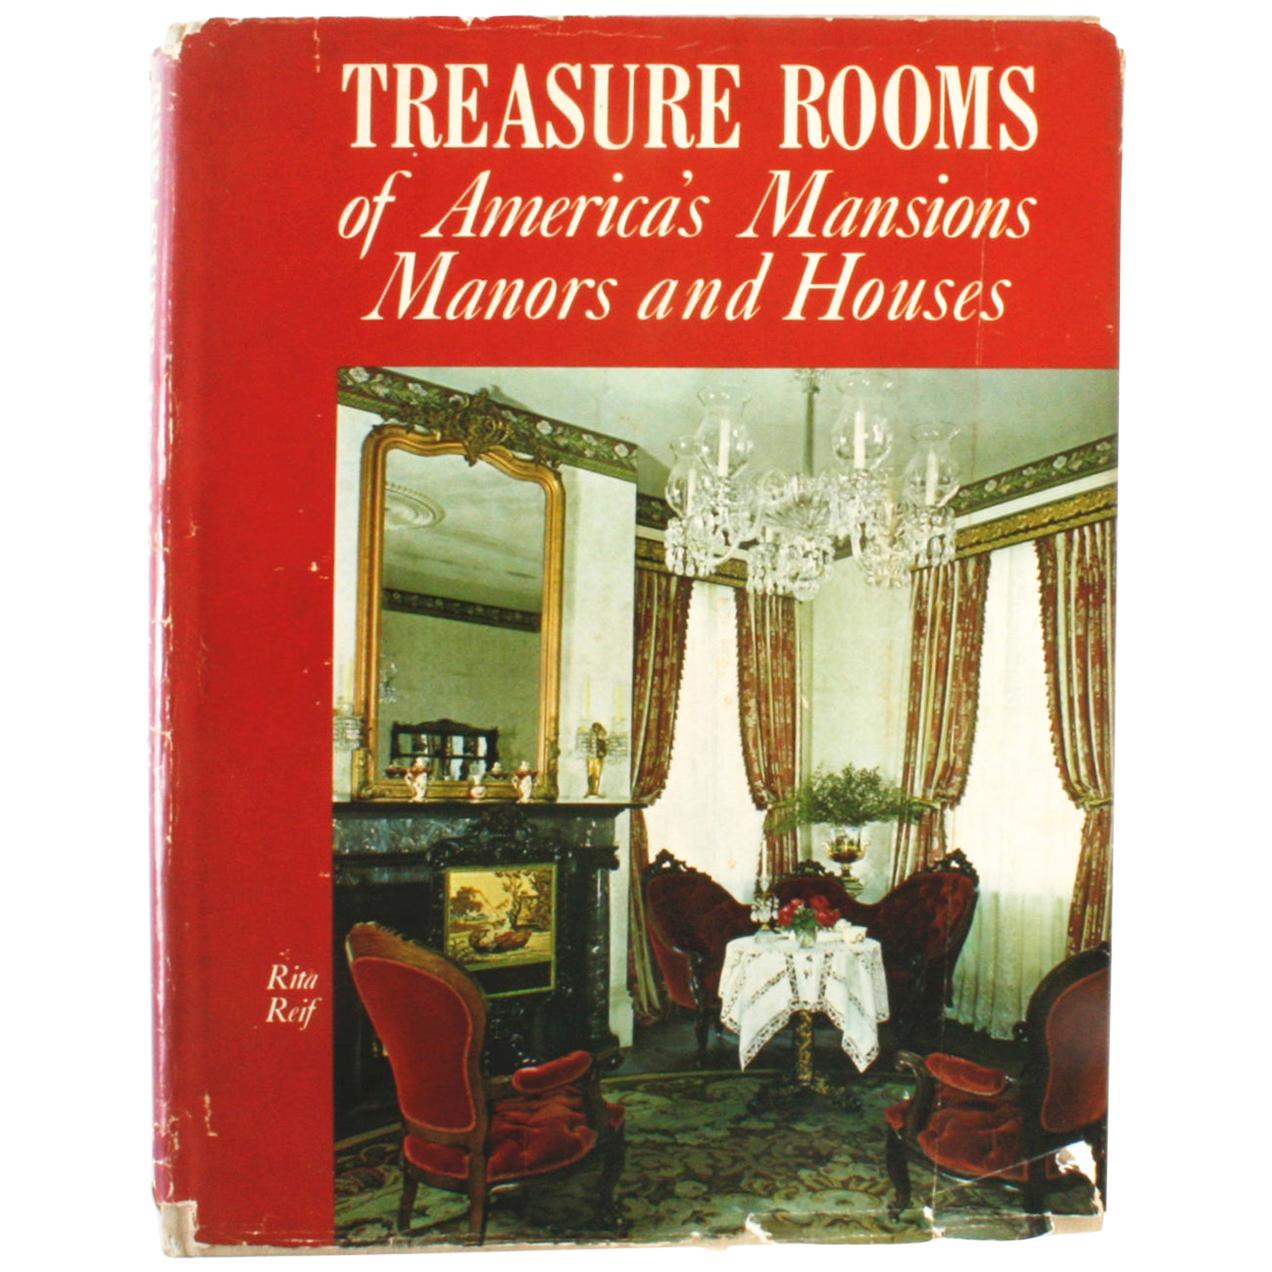 Treasure Rooms of America's Mansions Manors and Houses von Rita Reif, 1st Ed